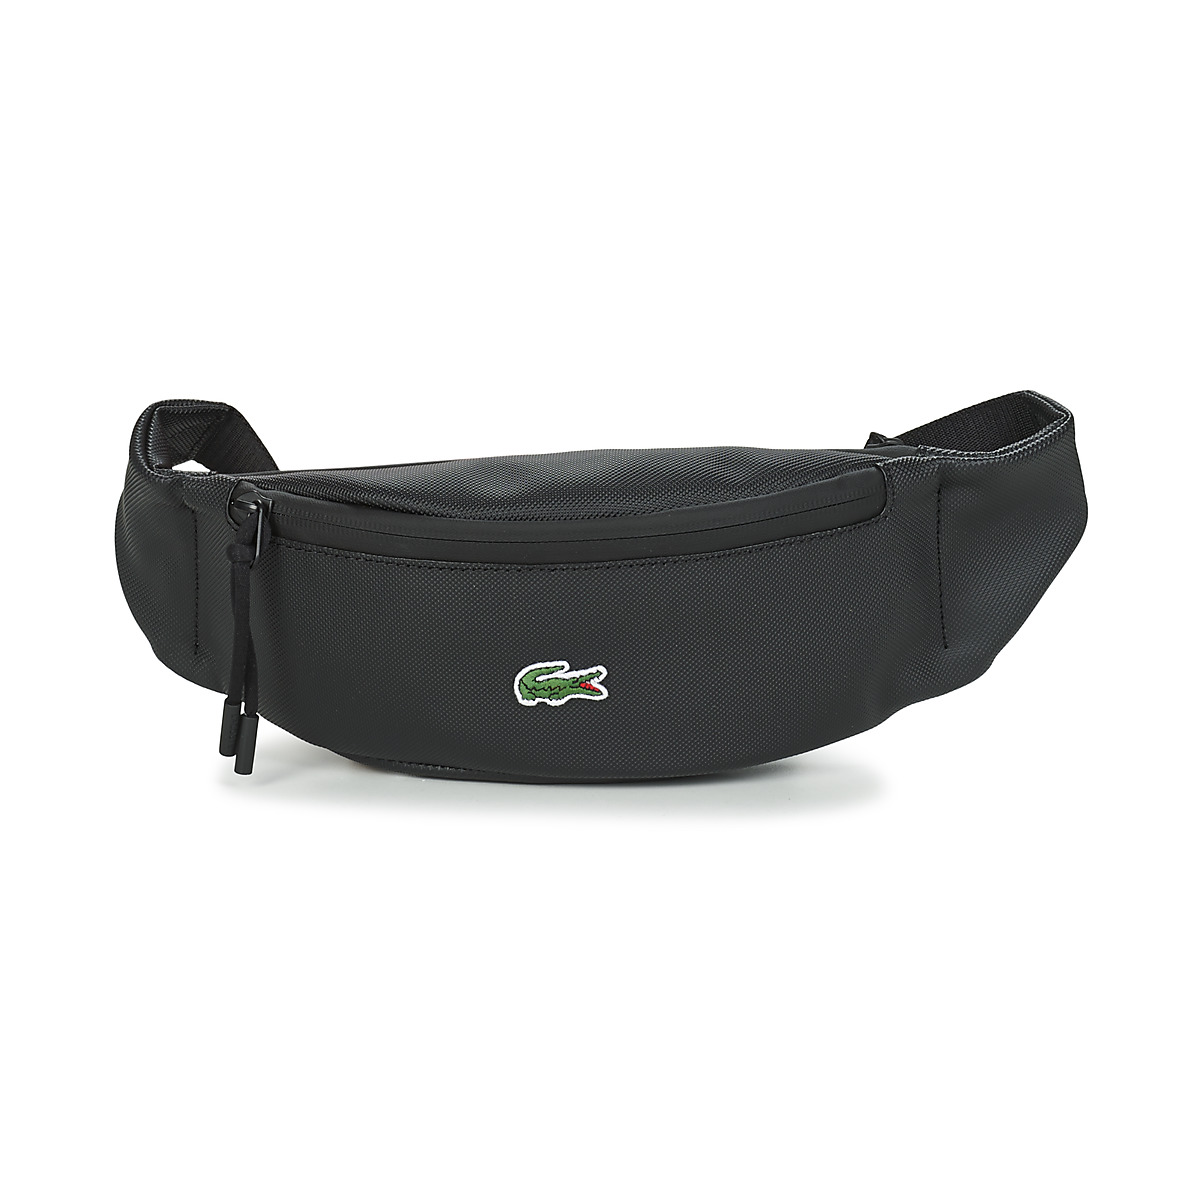 Lacoste LCST WAISTBAG Black - Fast 